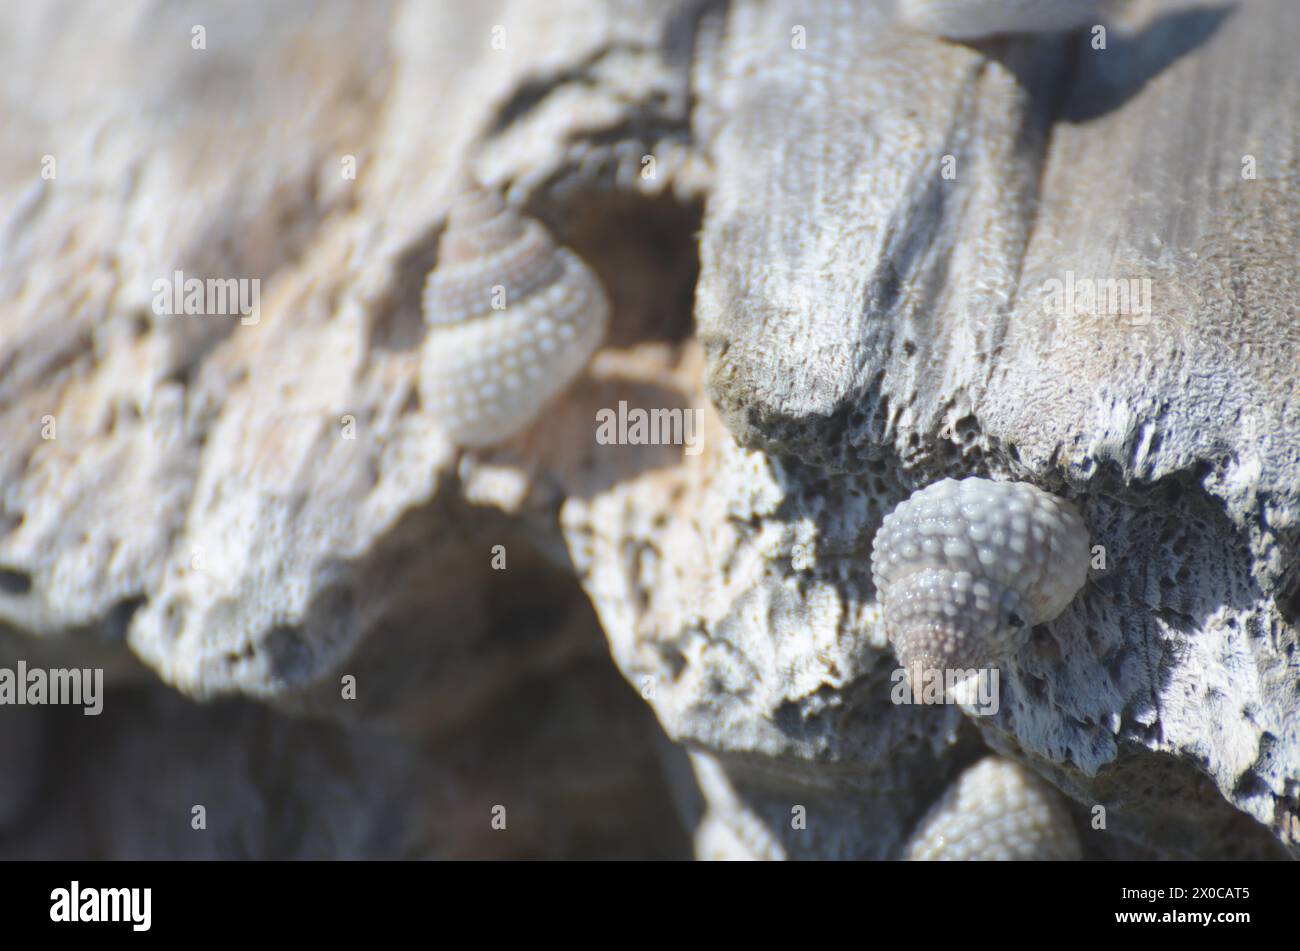 A pile of shells on a log. The shells are of different sizes and colors. The log is brown and has a rough texture. The scene gives off a sense of natu Stock Photo